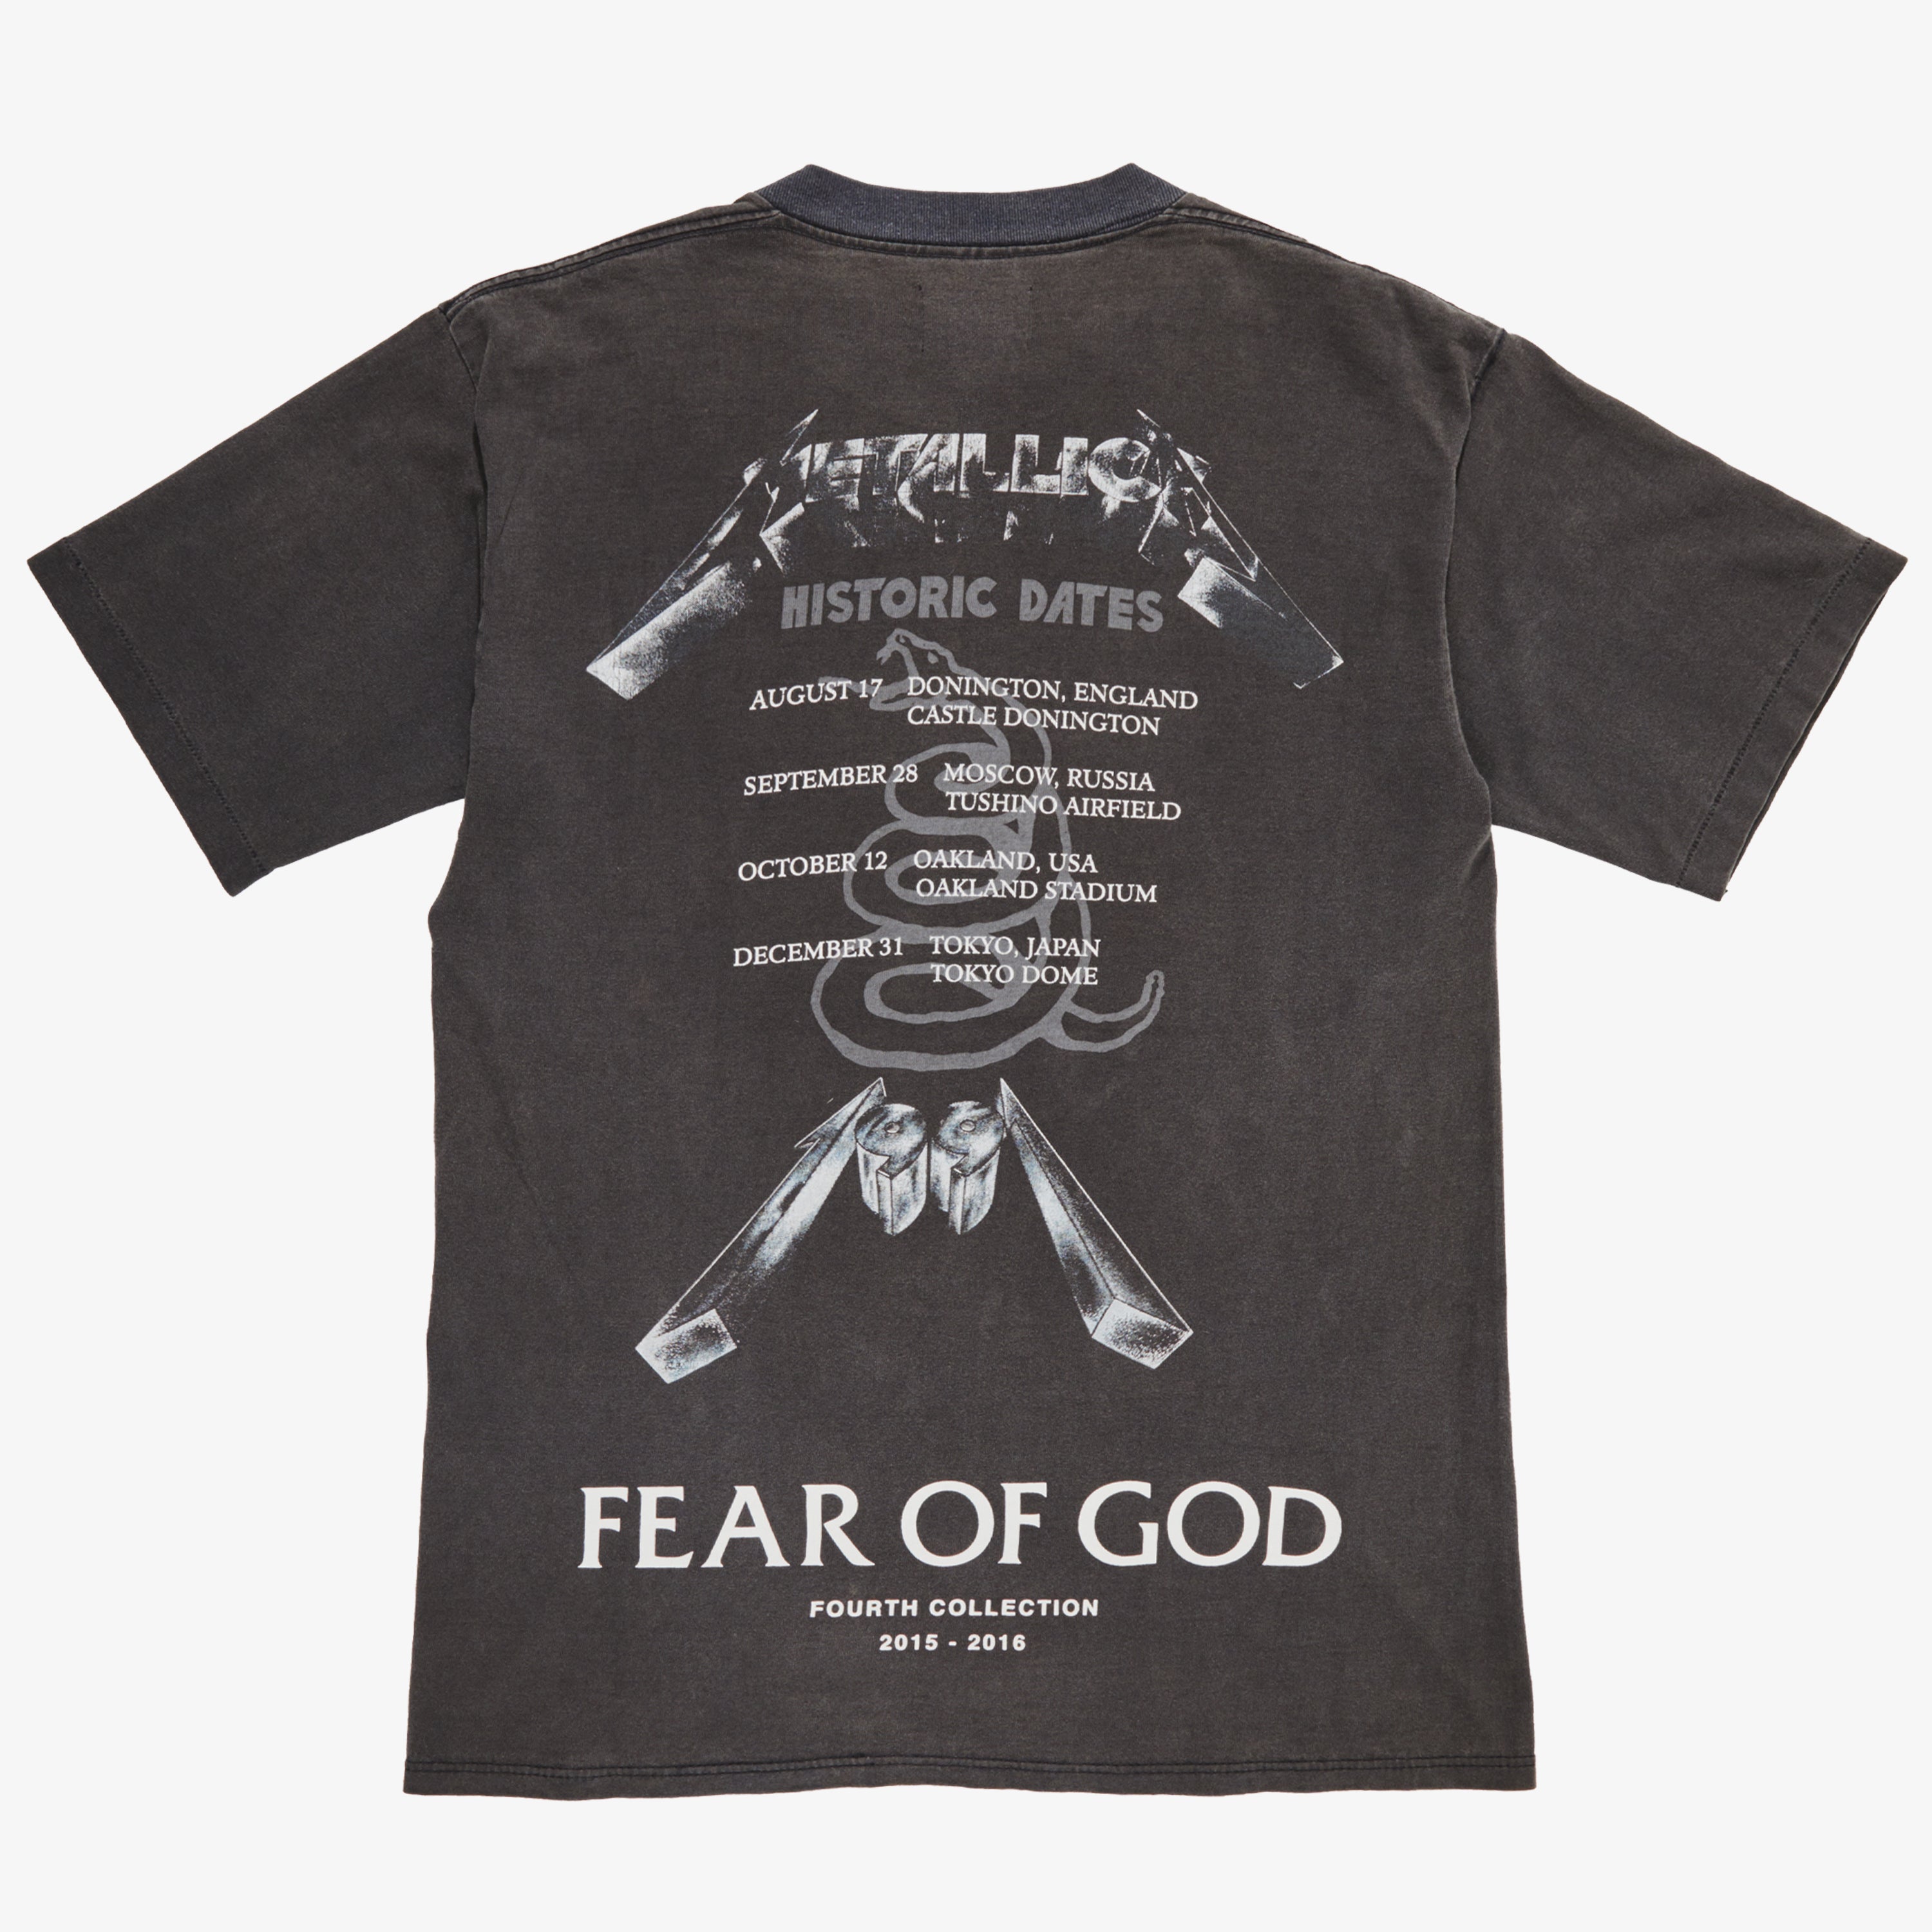 FEAR OF GOD 4TH COLLECTION METALLICA 1991 HISTORIC DATES TEE